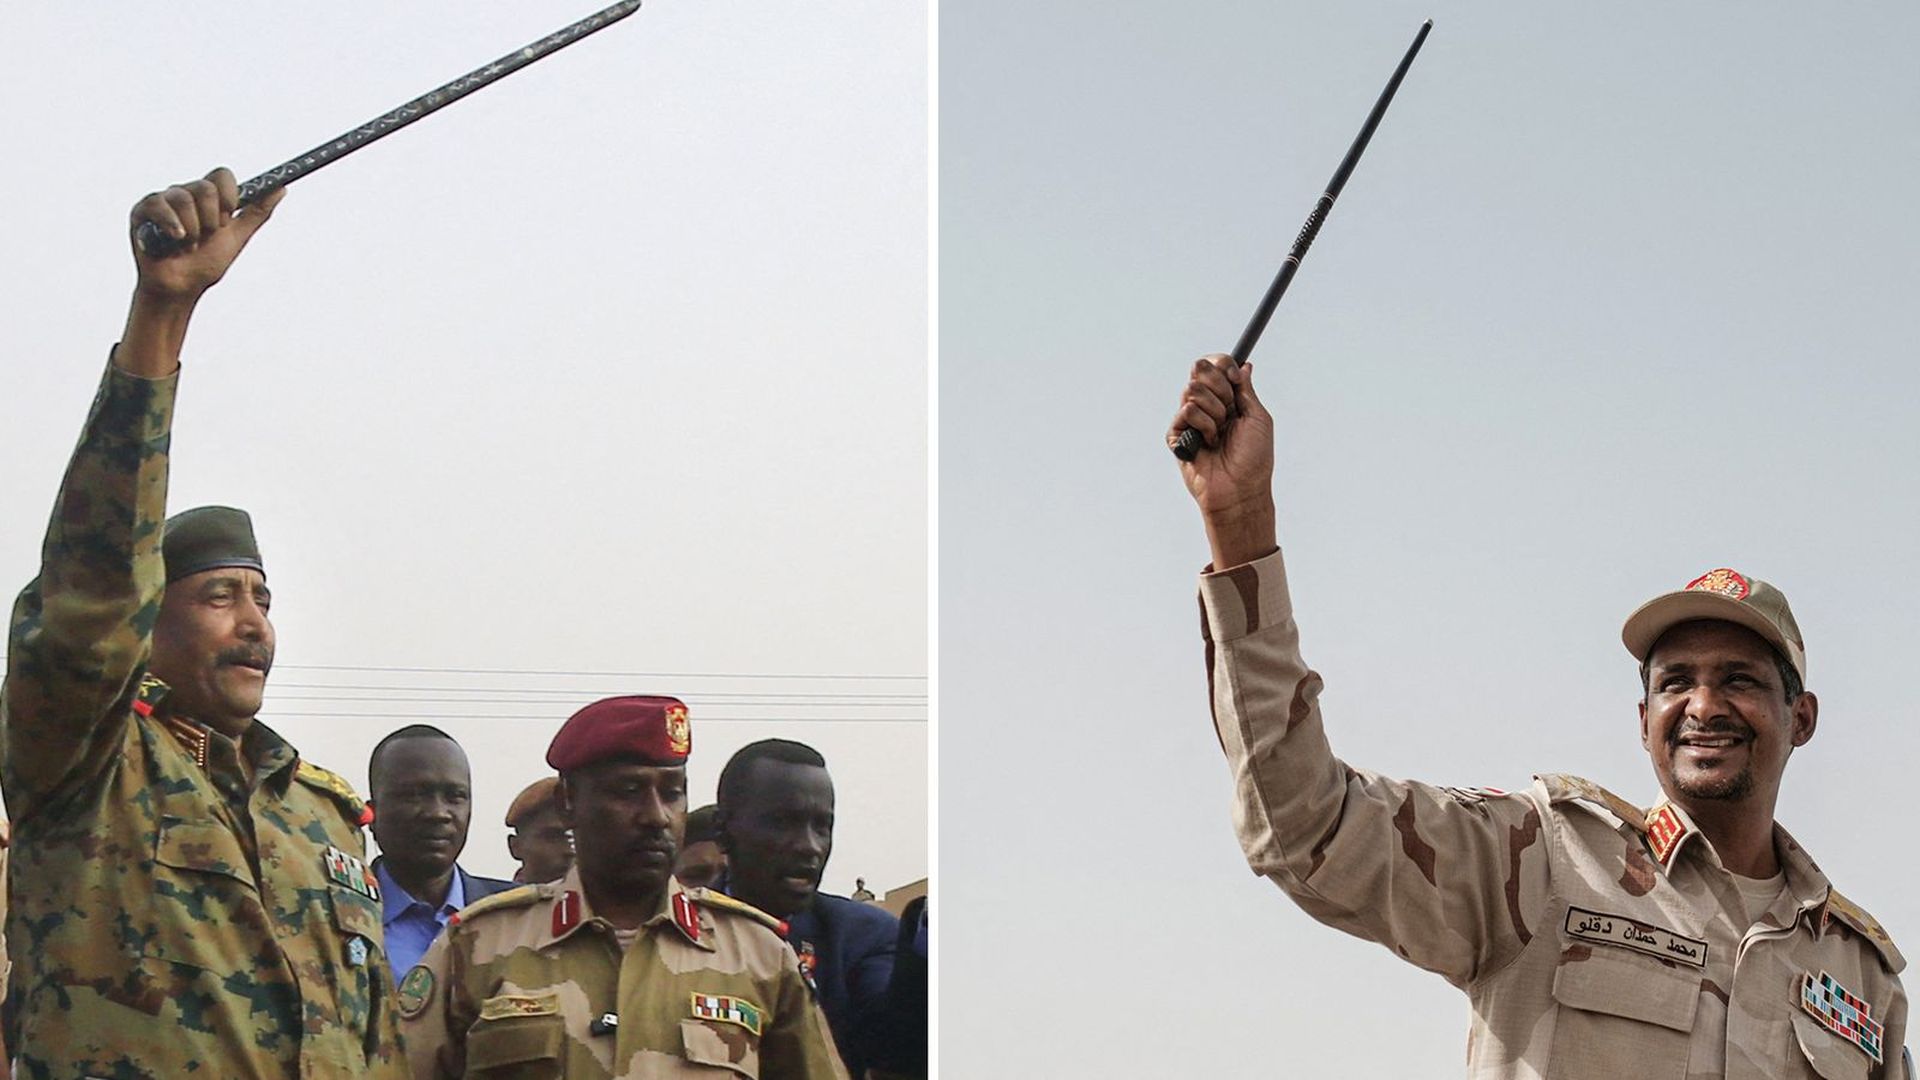 This file picture composite shows Sudanese army chief Gen. Abdel Fattah al-Burhan (L) on June 29, 2019 and Sudanese paramilitary commander Gen. Mohamed Hamdan Daglo on June 18, 2019. Photos: Photo: Yasuyoshi Chiba/Ashraf Shazly/AFP via Getty Images